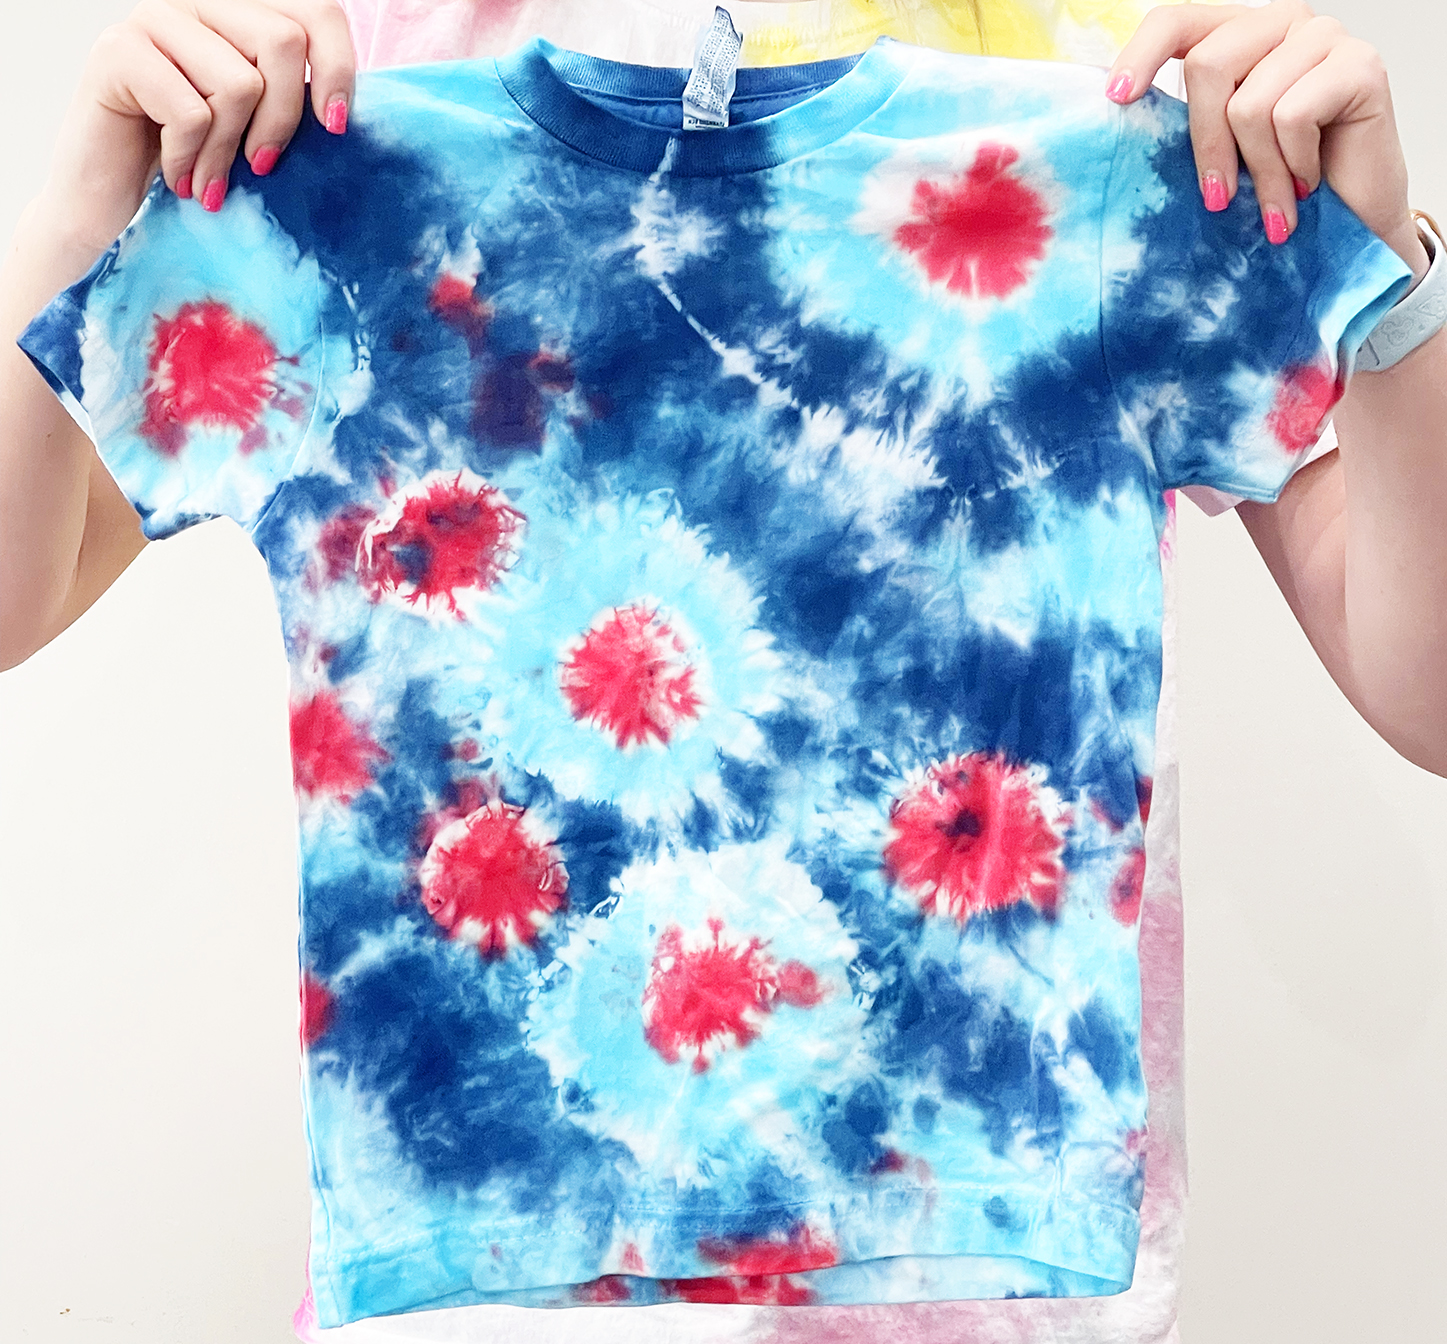 How to Tie Dye a Spiral Pattern: A Step-by-Step Guide - Sarah Maker